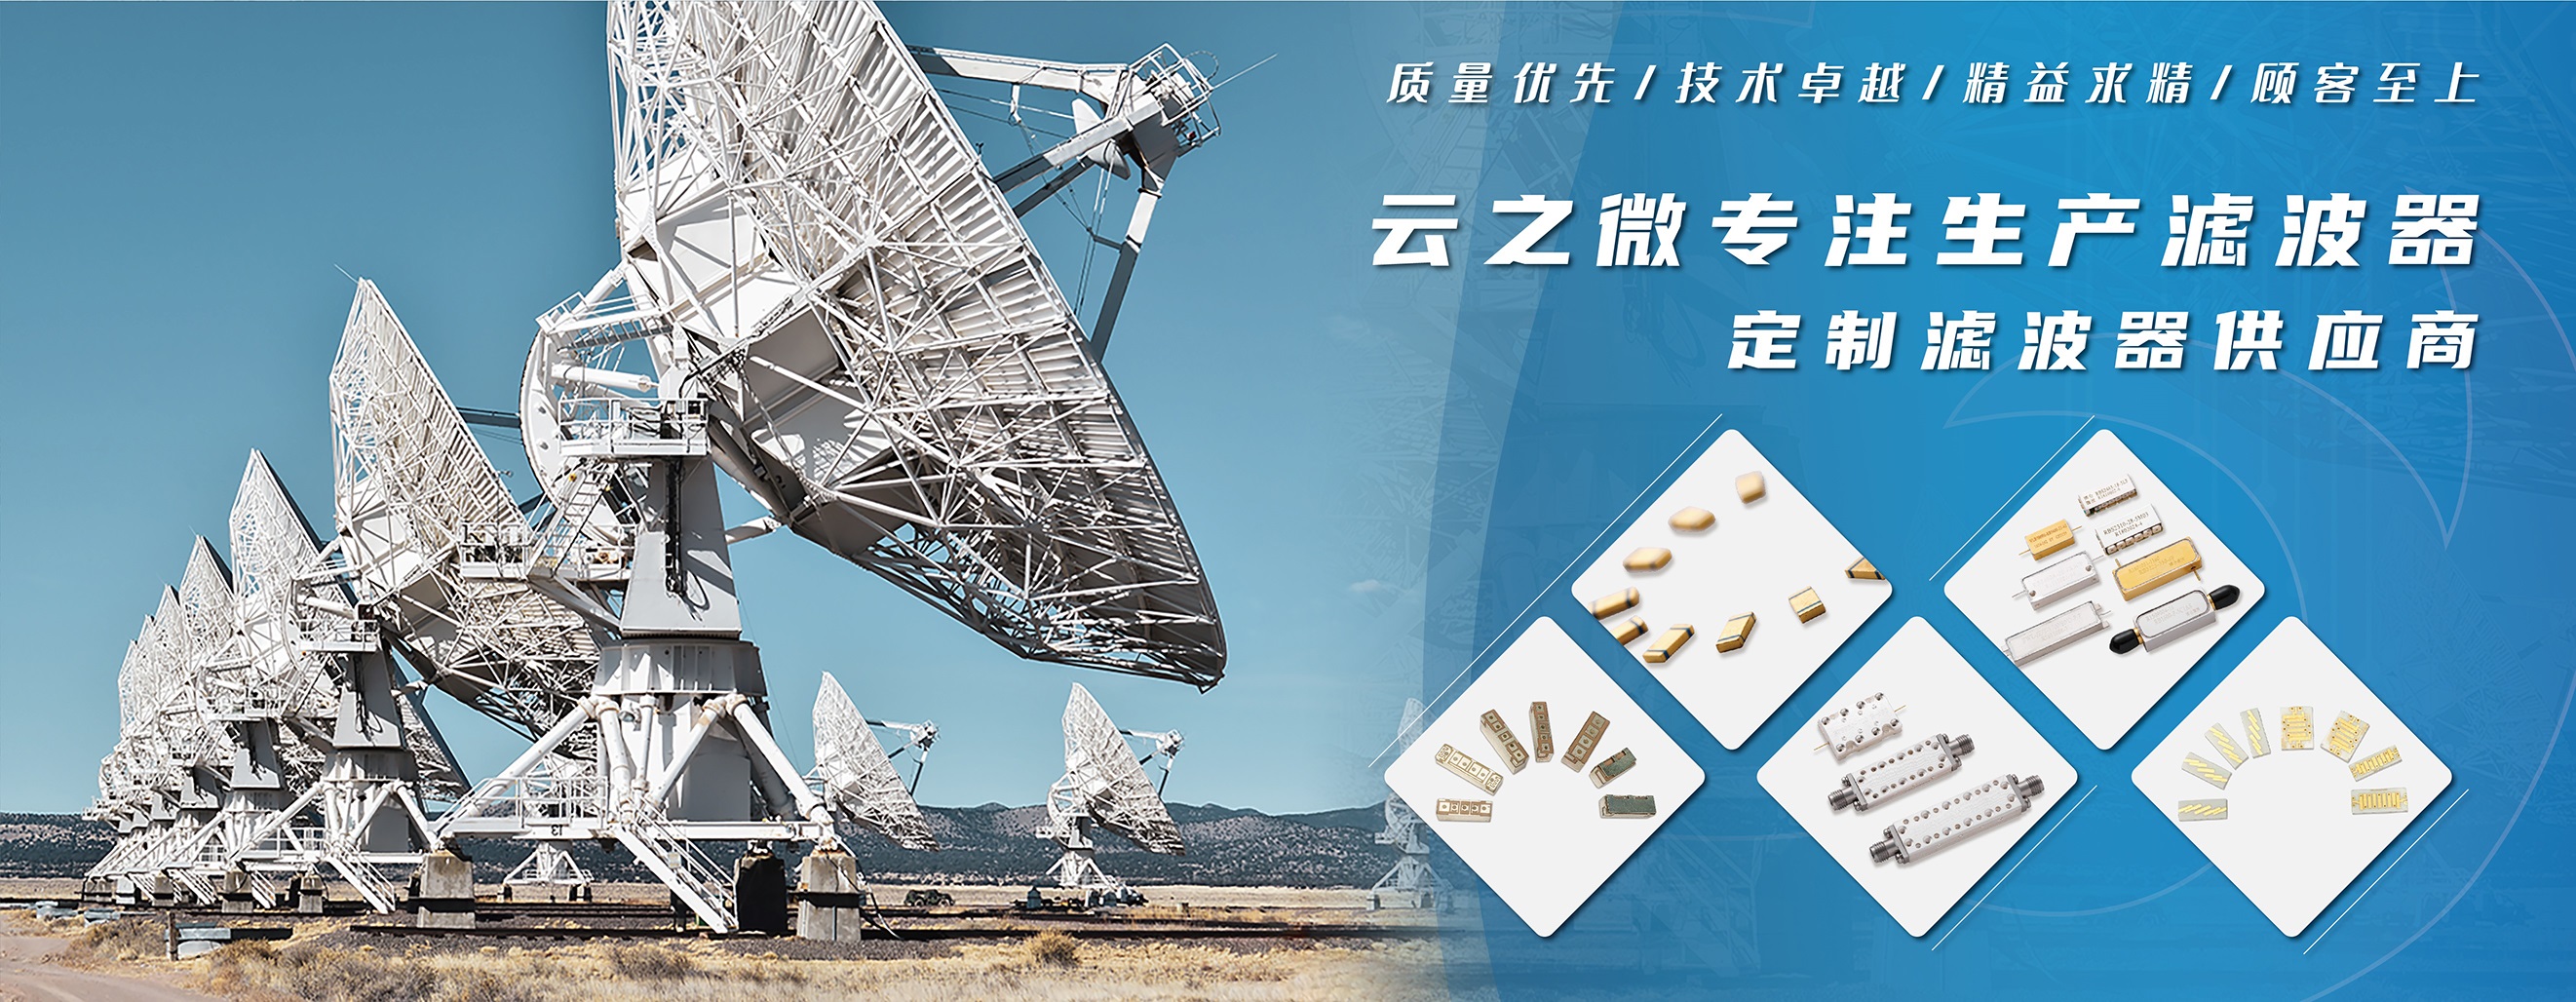 manufacturer of RF/Microwave components